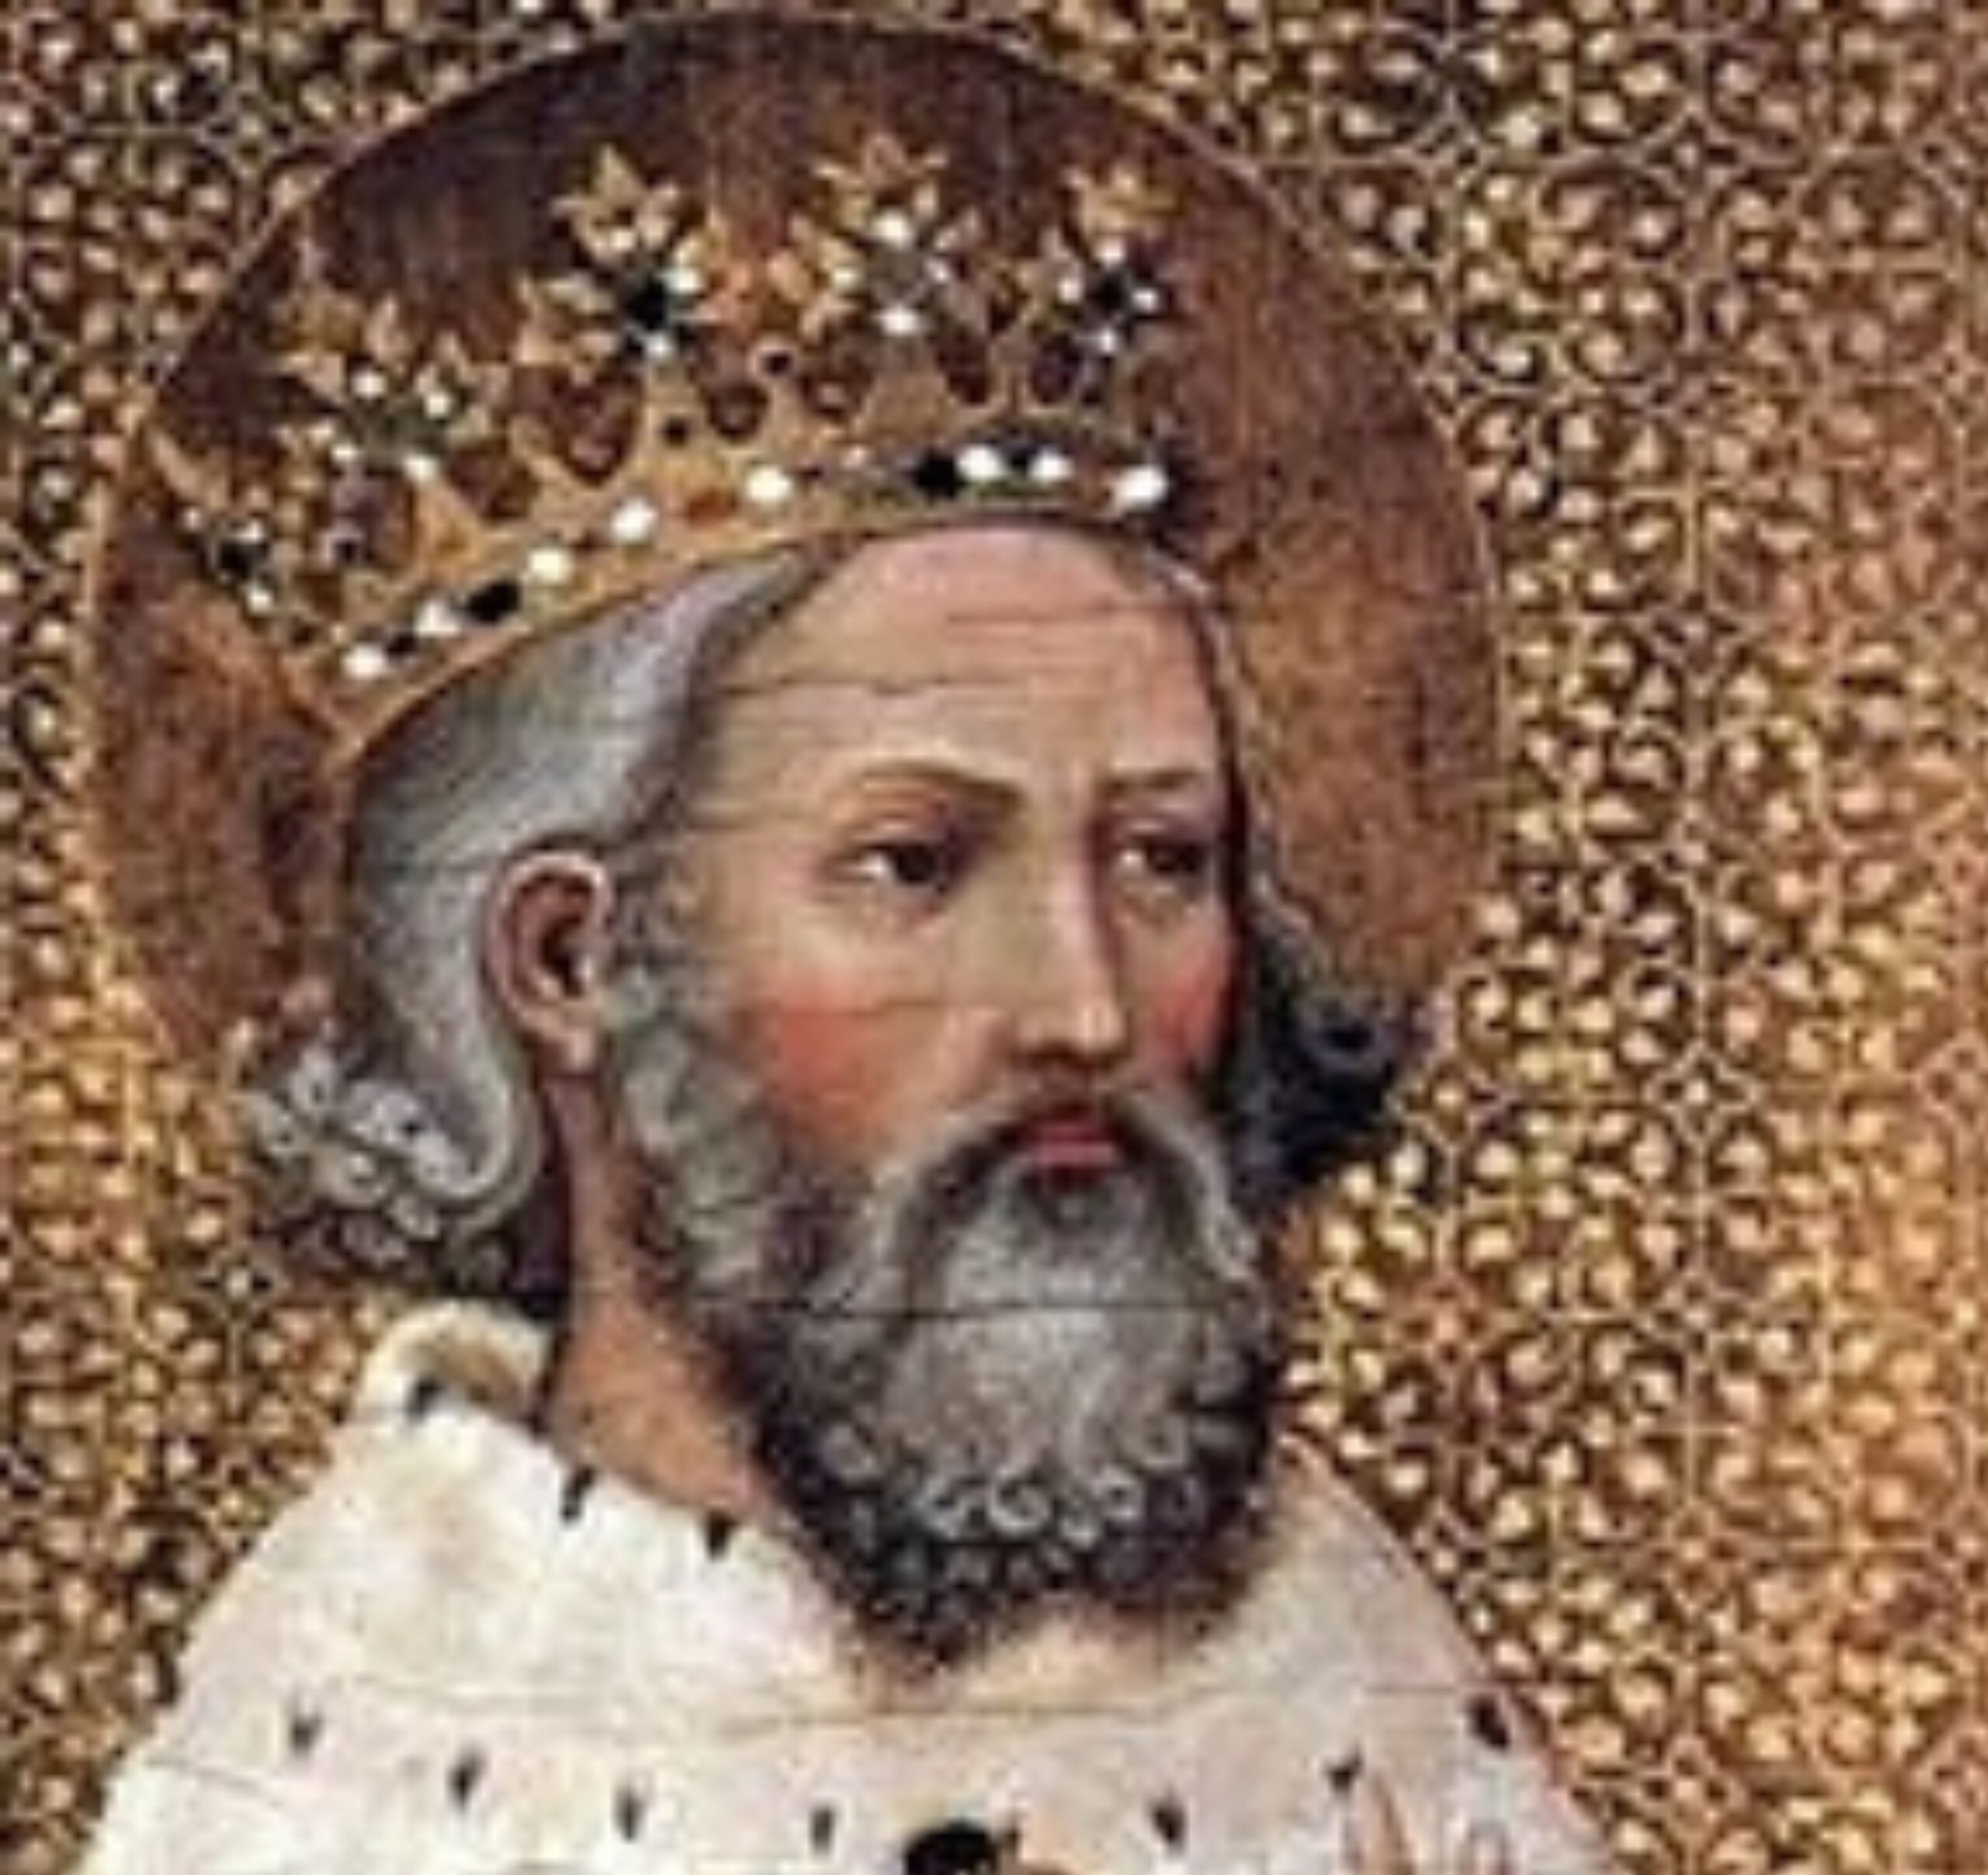 Fun facts about Edward the Confessor